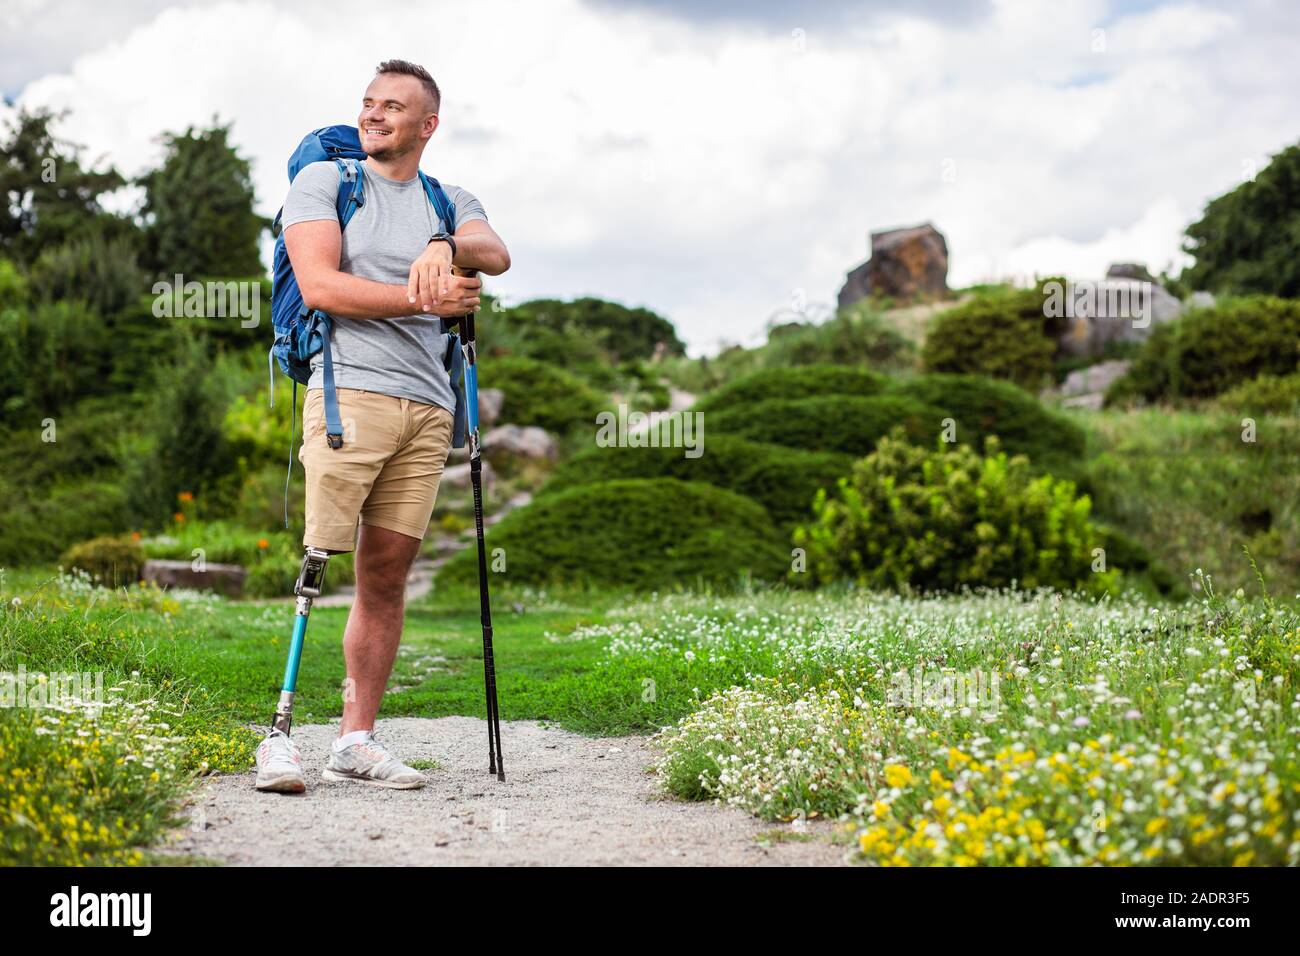 Cheerful man with prosthesis standing with Nordic walking sticks Stock Photo